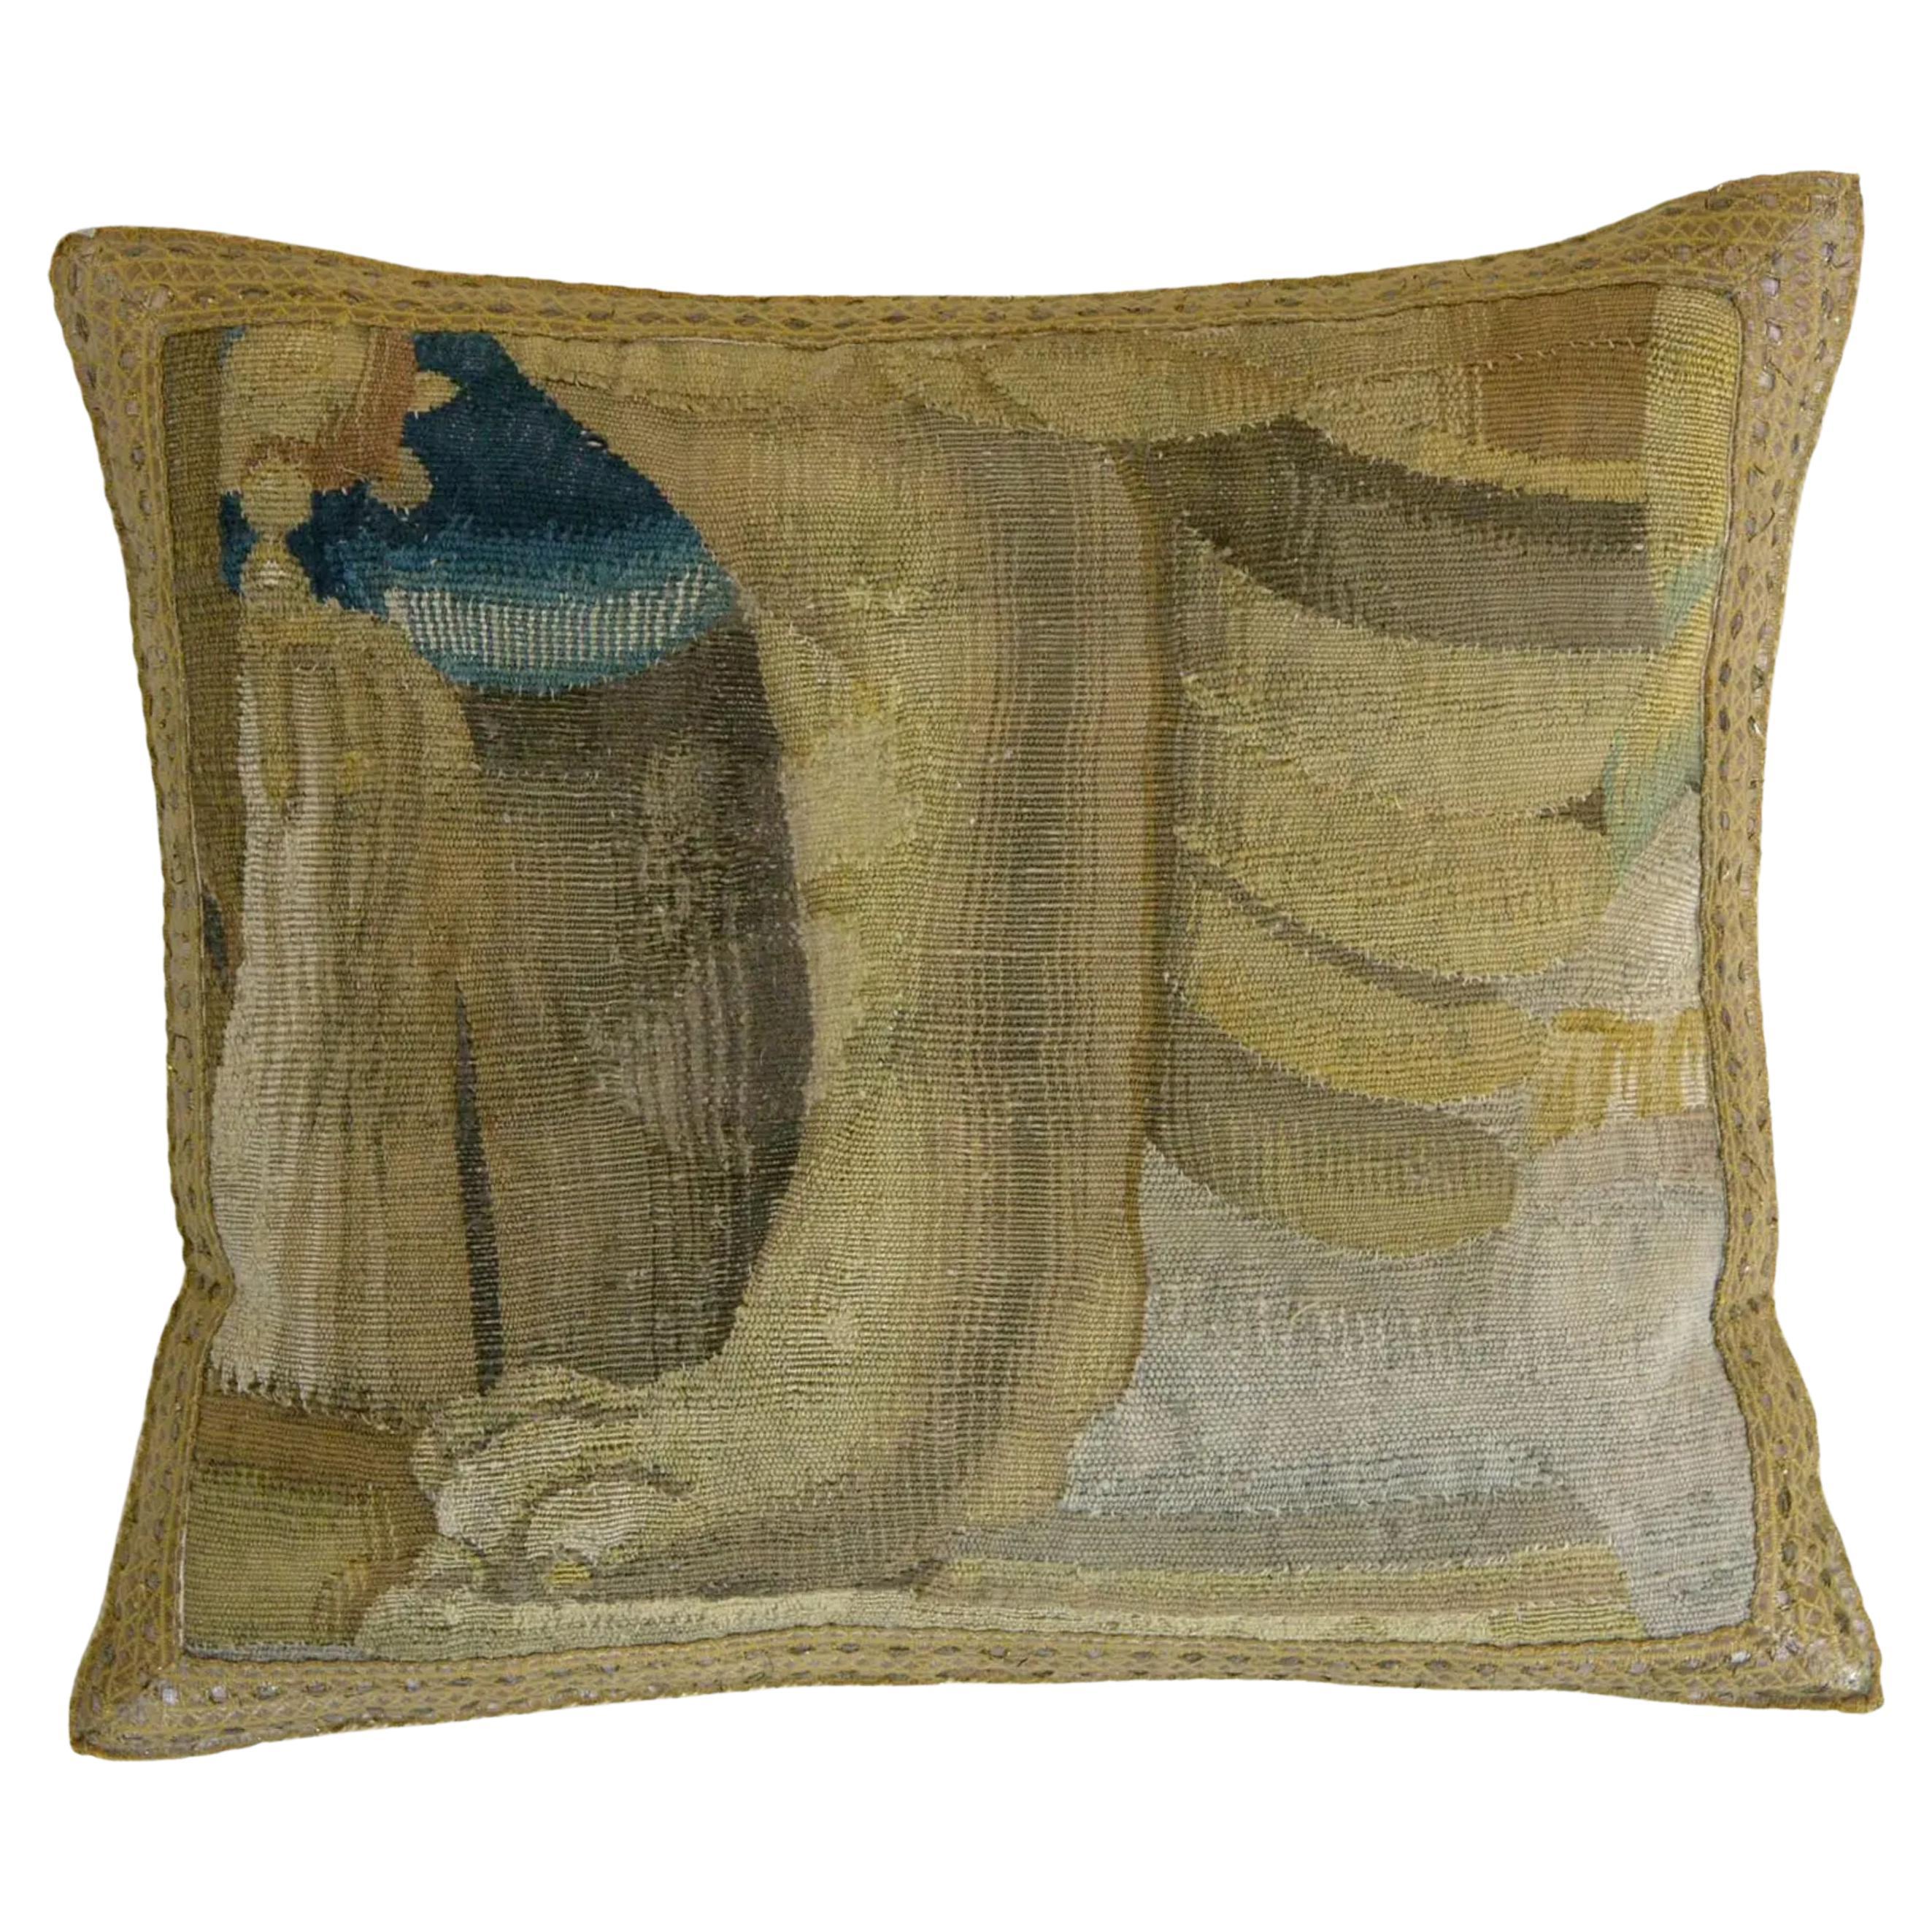 16th Century Antique a Brussels Baroque Tapestry Pillow - 17'' X 16''